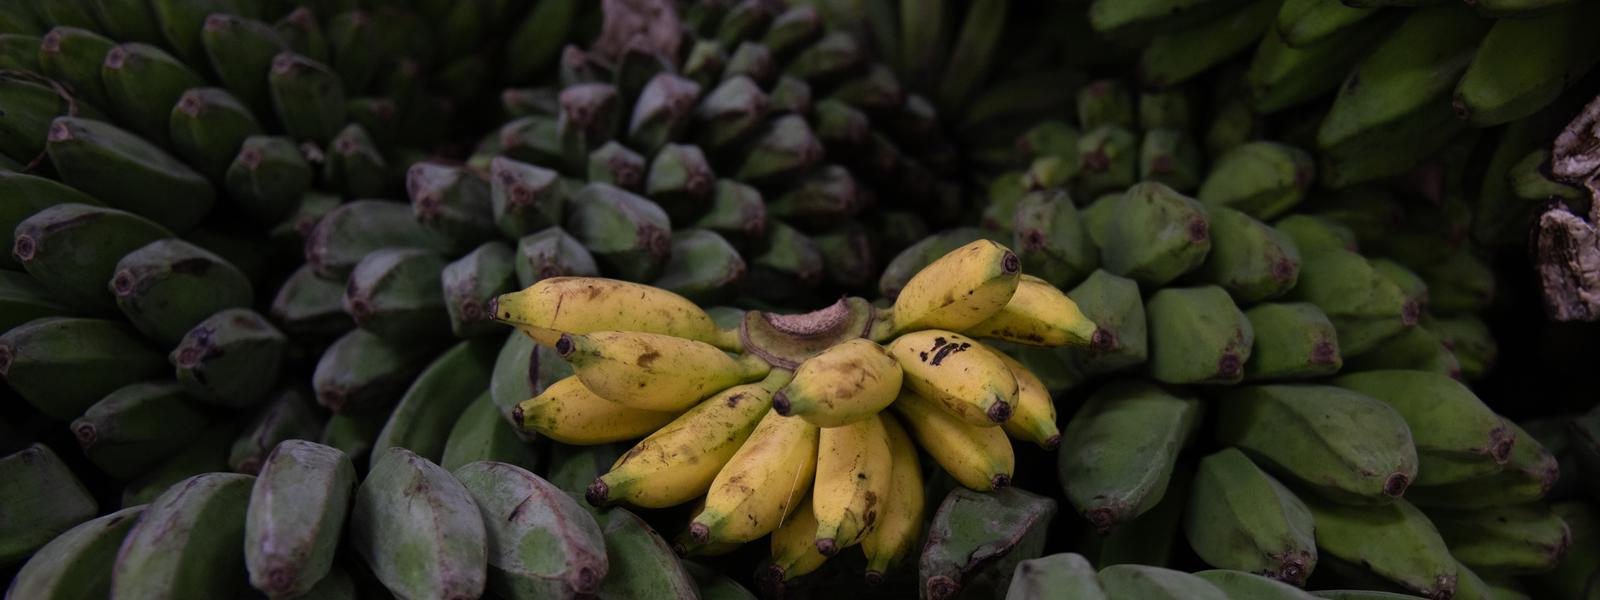 A bunch of ripe bananas in the middle of several unripe bunches